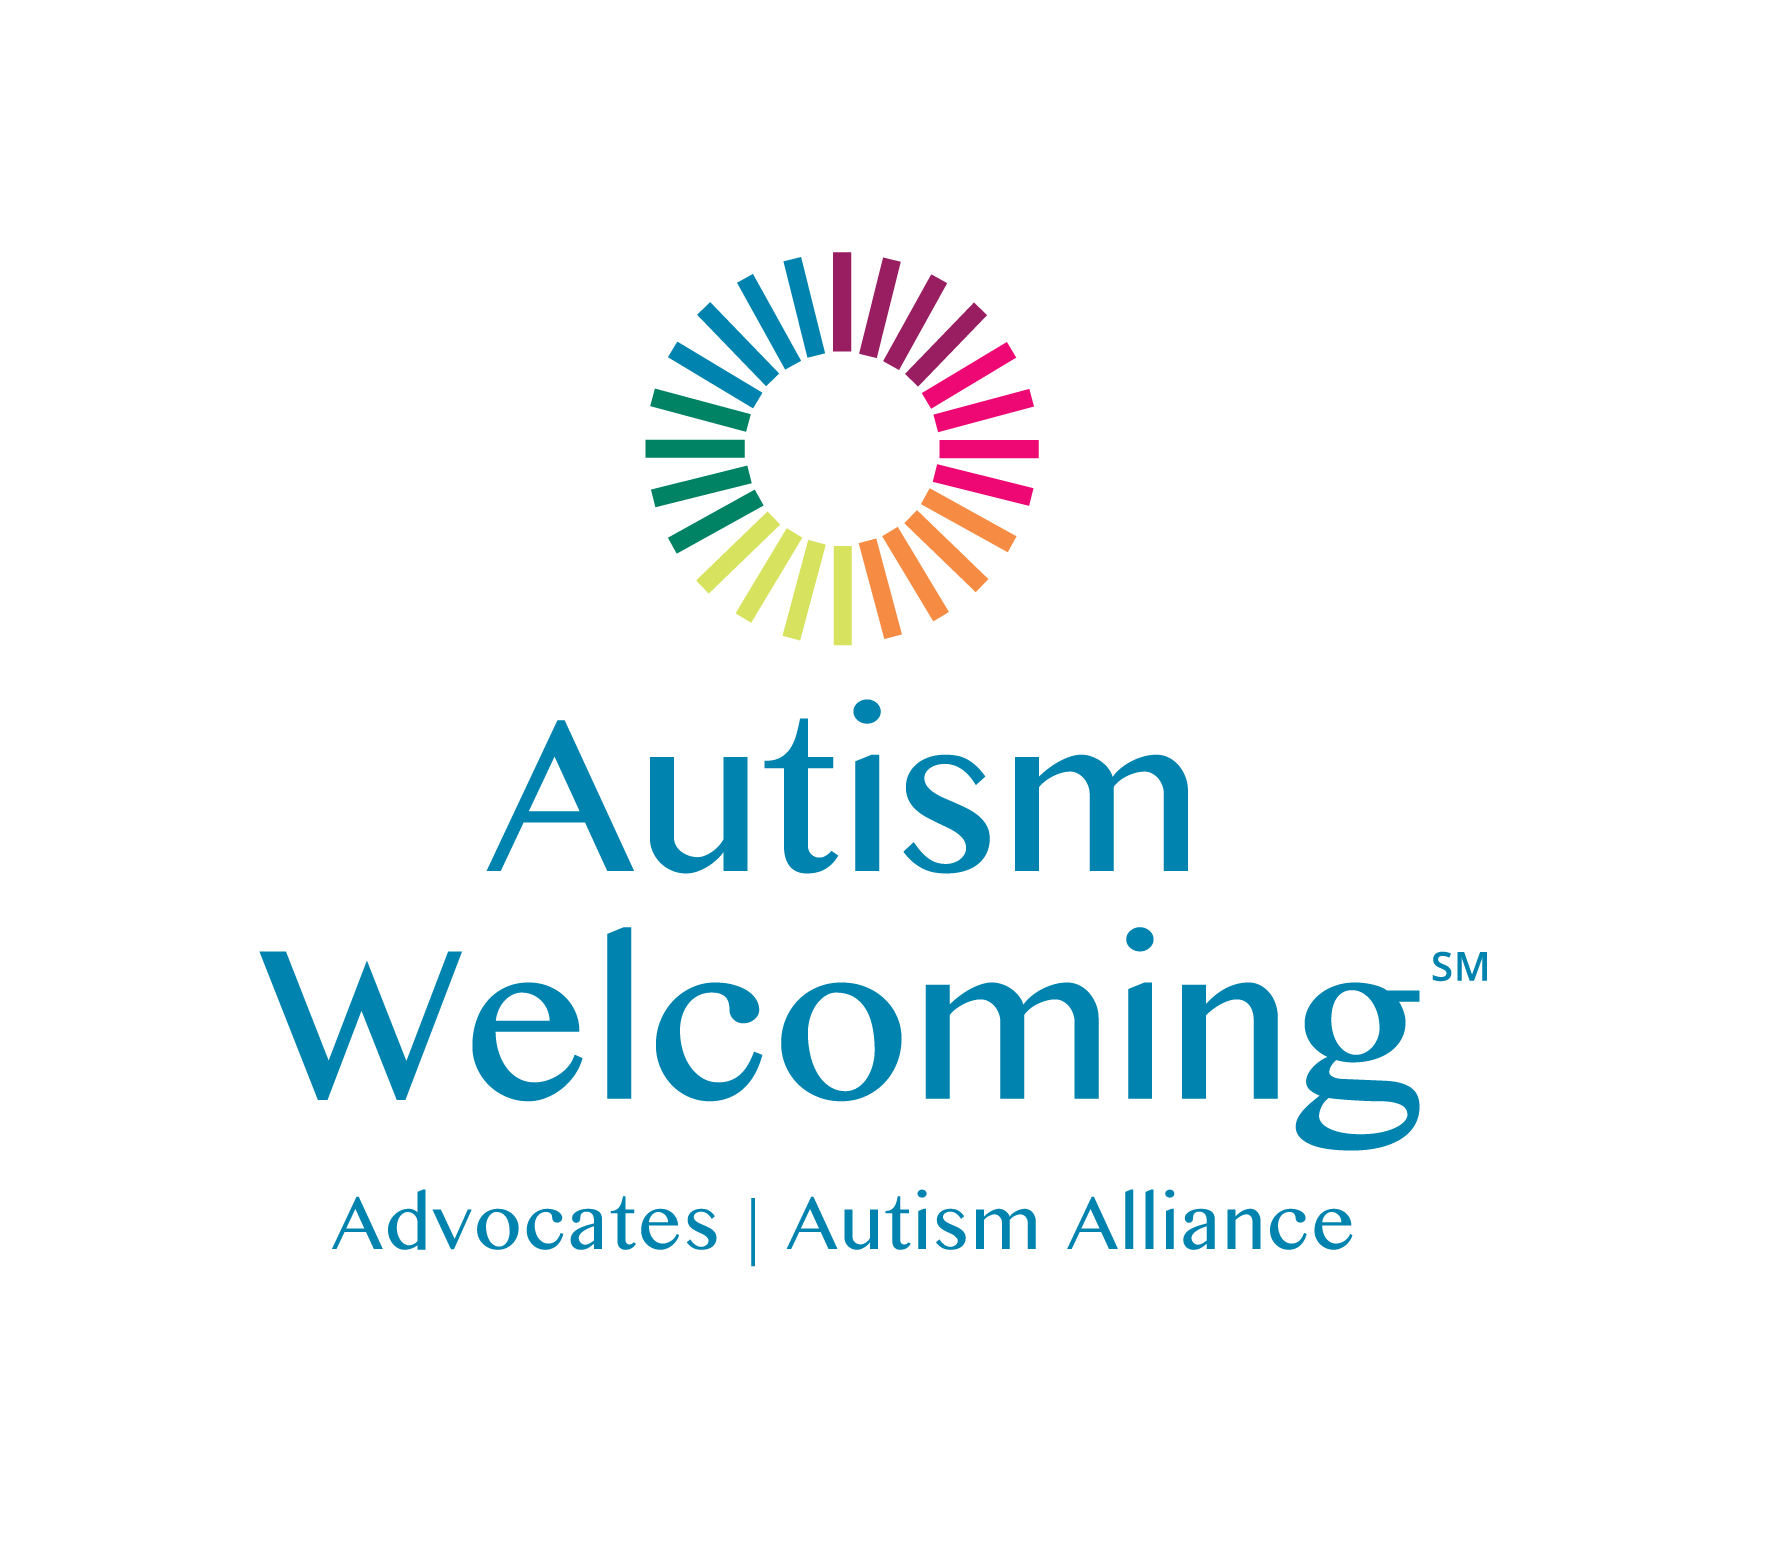 Autism Welcoming logo graphic